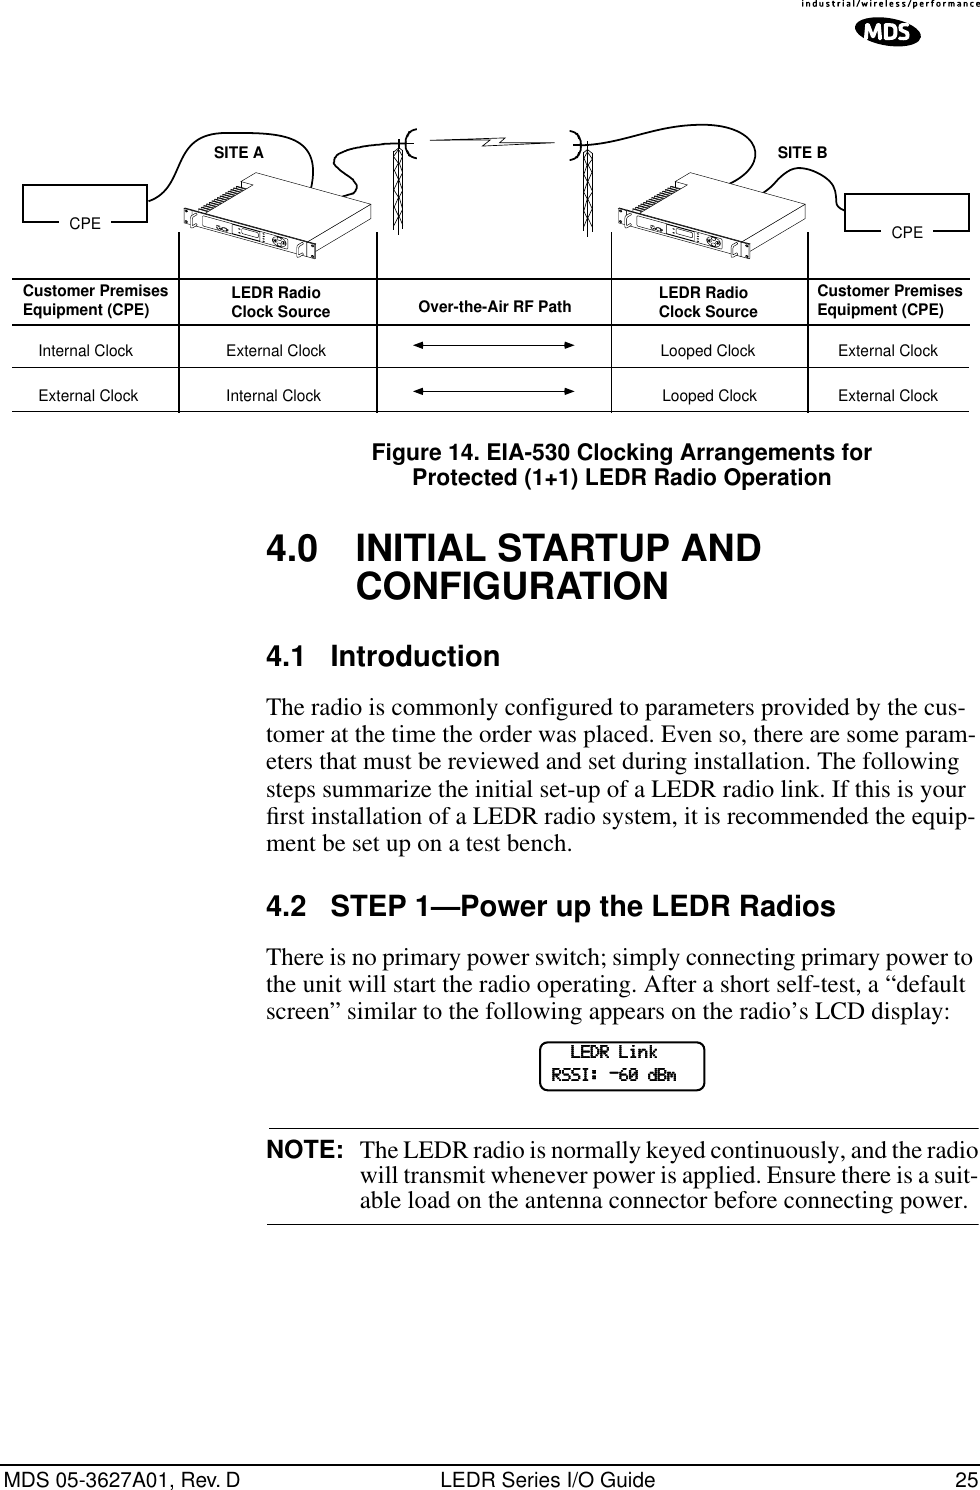 MDS 05-3627A01, Rev. D LEDR Series I/O Guide 25Figure 14. EIA-530 Clocking Arrangements for Protected (1+1) LEDR Radio Operation4.0 INITIAL STARTUP AND CONFIGURATION4.1 IntroductionThe radio is commonly configured to parameters provided by the cus-tomer at the time the order was placed. Even so, there are some param-eters that must be reviewed and set during installation. The following steps summarize the initial set-up of a LEDR radio link. If this is your ﬁrst installation of a LEDR radio system, it is recommended the equip-ment be set up on a test bench.4.2 STEP 1—Power up the LEDR RadiosThere is no primary power switch; simply connecting primary power to the unit will start the radio operating. After a short self-test, a “default screen” similar to the following appears on the radio’s LCD display:NOTE: The LEDR radio is normally keyed continuously, and the radiowill transmit whenever power is applied. Ensure there is a suit-able load on the antenna connector before connecting power.Over-the-Air RF PathCPECustomer PremisesEquipment (CPE) LEDR RadioClock SourceCPEInternal Clock External Clock Looped Clock External ClockExternal Clock Internal Clock Looped Clock External ClockCustomer PremisesEquipment (CPE)SITE A SITE BLEDR RadioClock Source            LLLLEEEEDDDDRRRR    LLLLiiiinnnnkkkk                    RRRRSSSSSSSSIIII::::    ----66660000    ddddBBBBmmmm